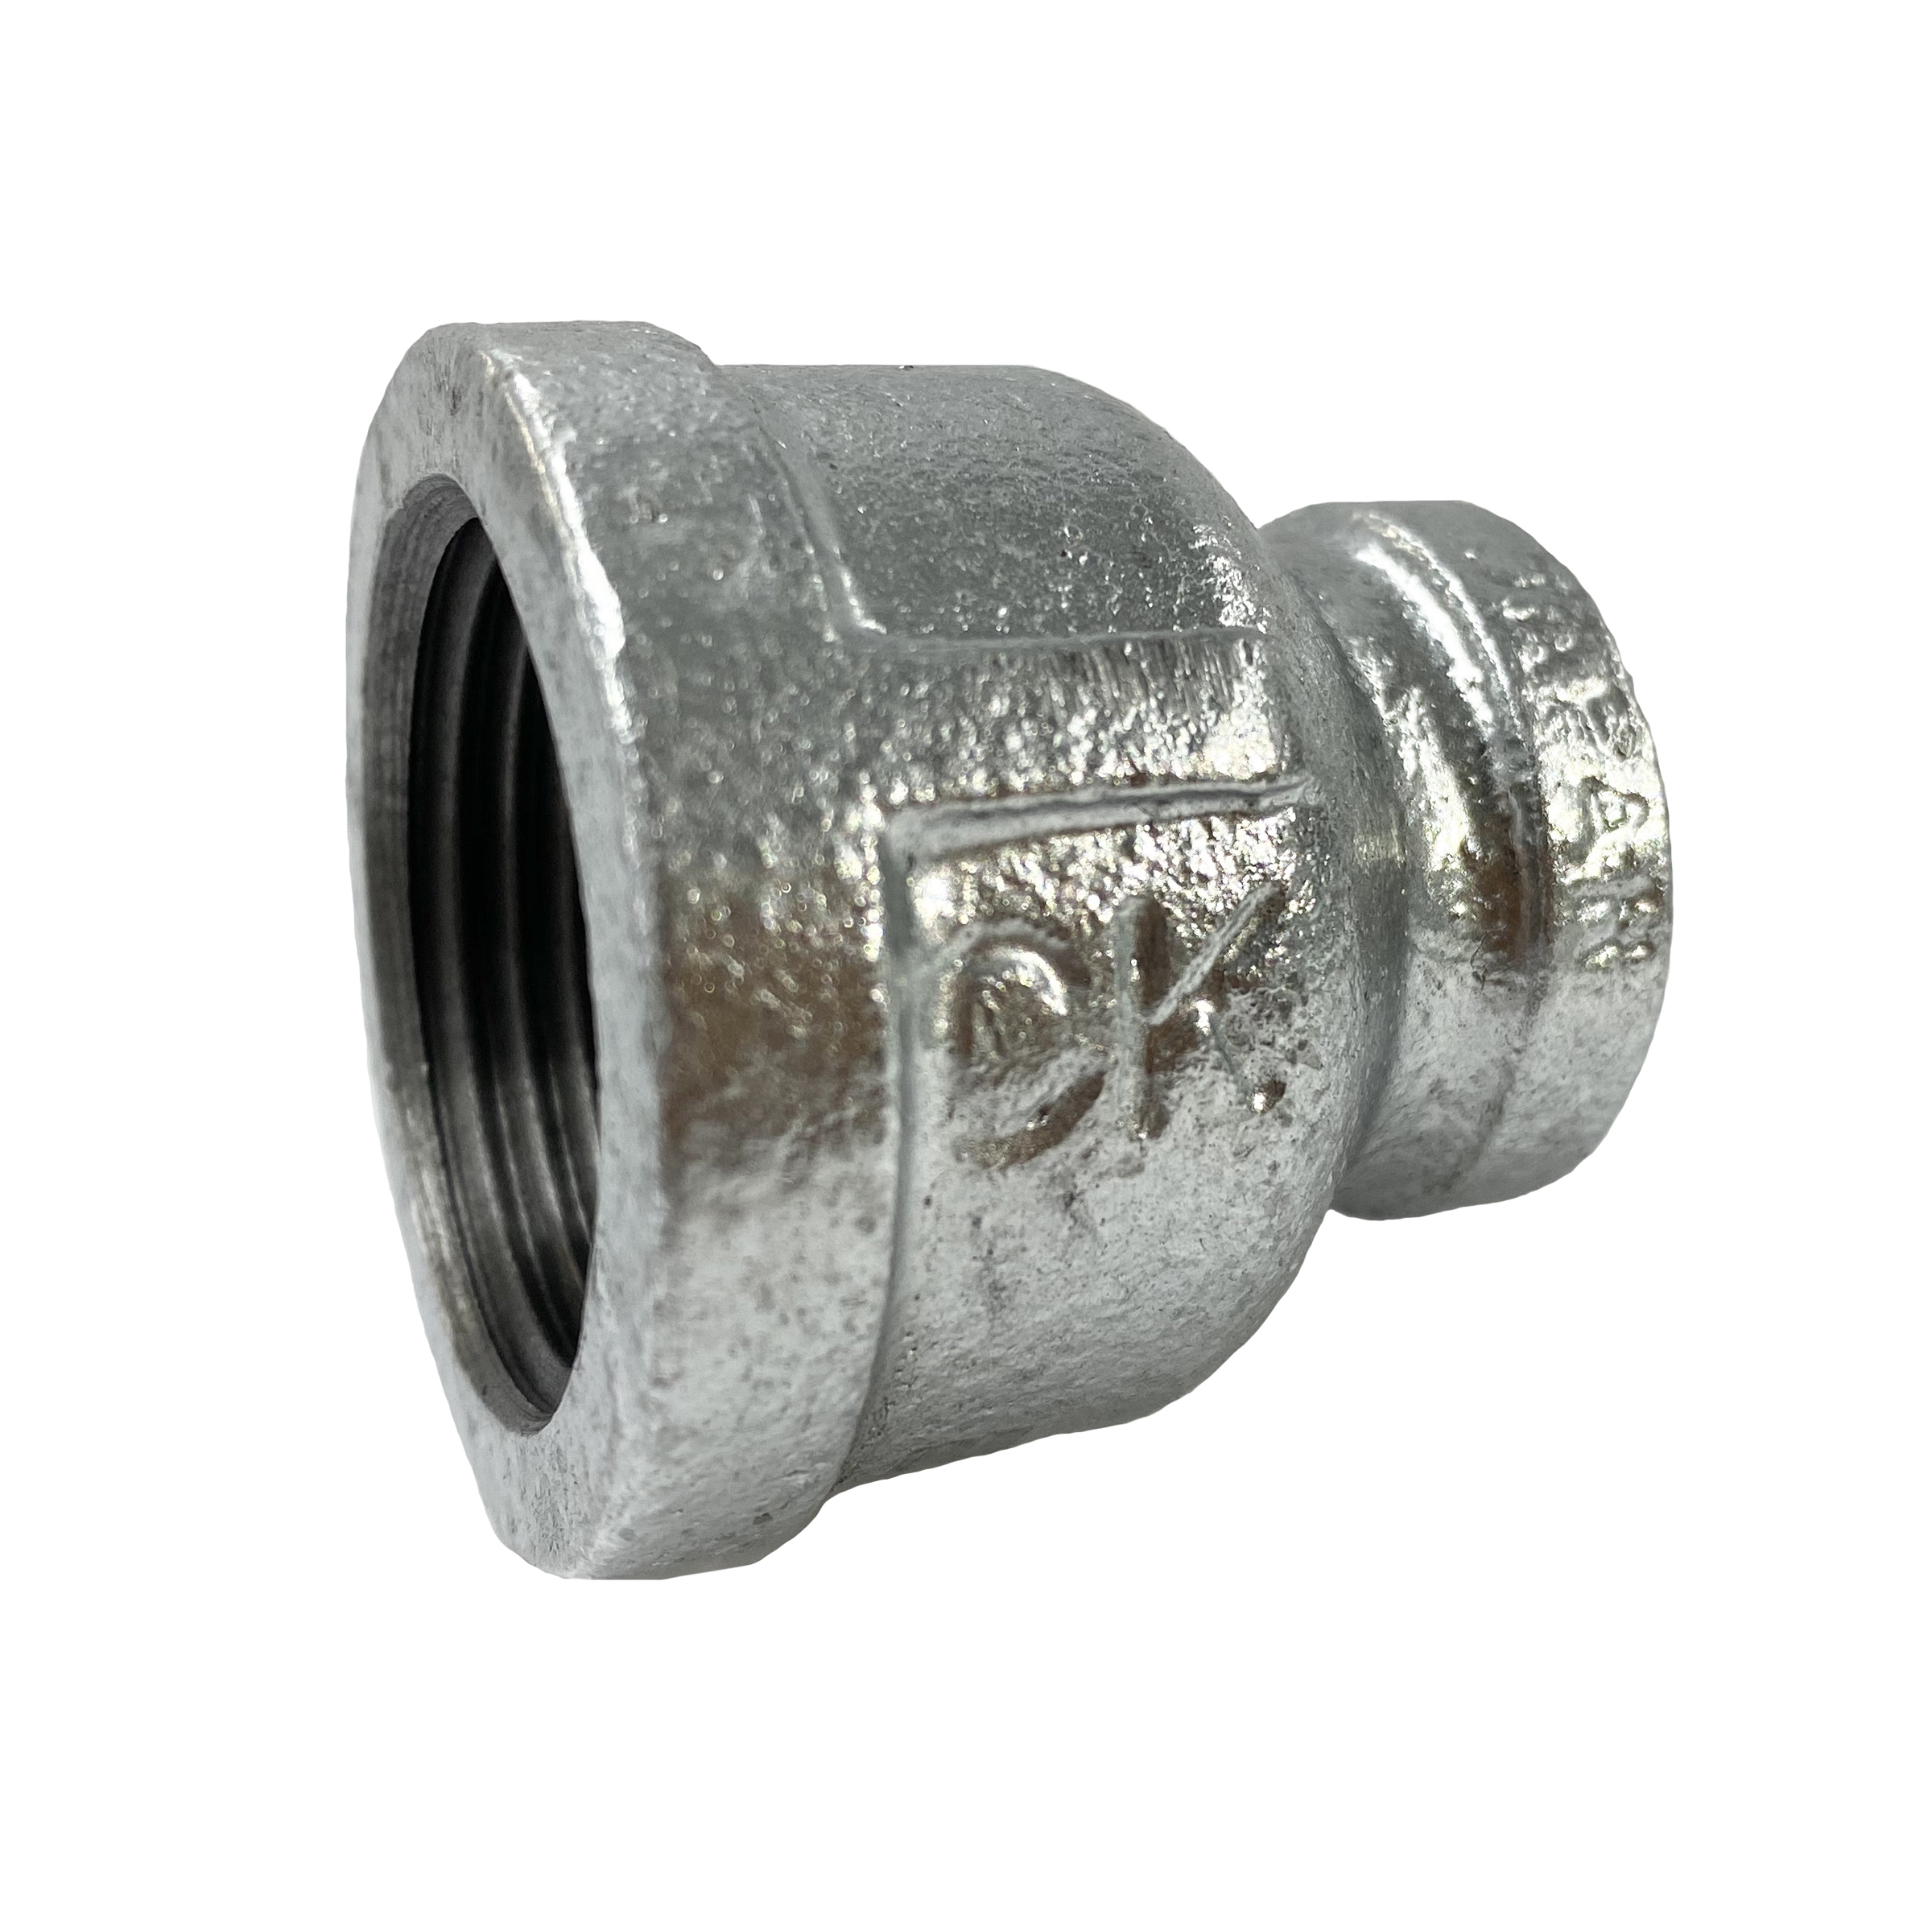 CK Fittings - Screw-in Type Malleable Cast Iron Pipe Fitting - Socket with Different Diameters with Band BRS-40X15-W